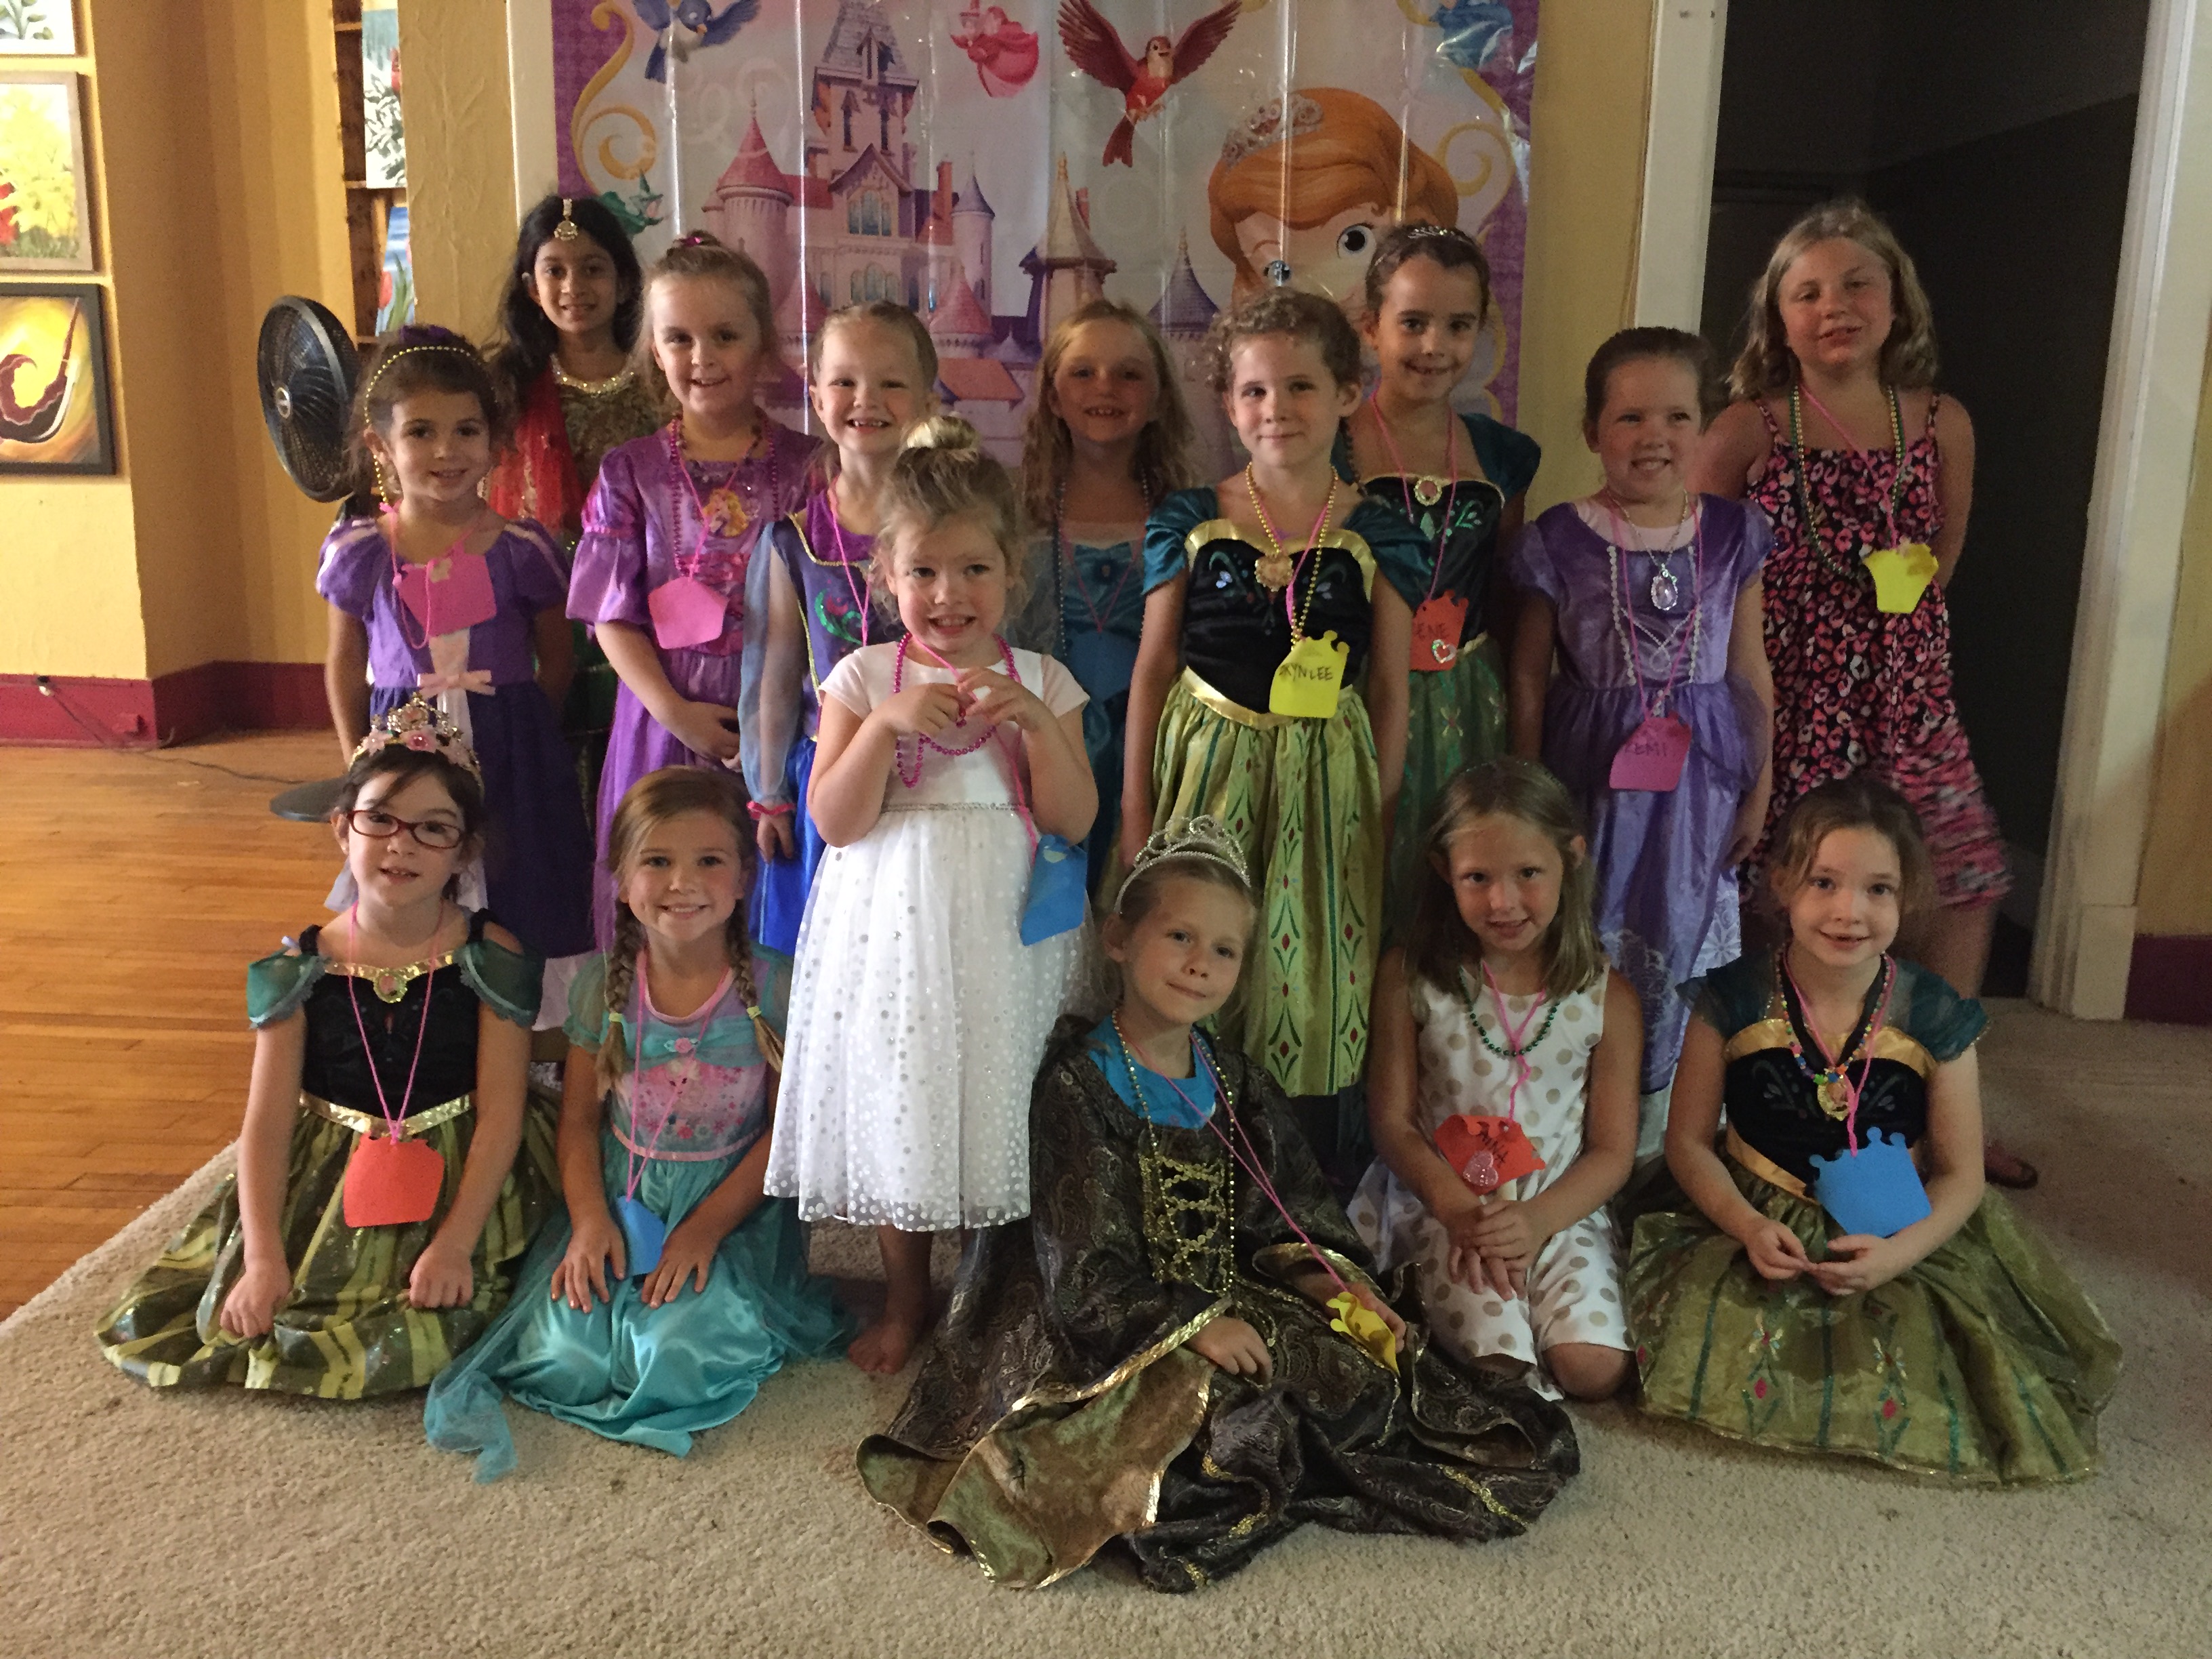 Costume dress up time for Princess Camp 2016!